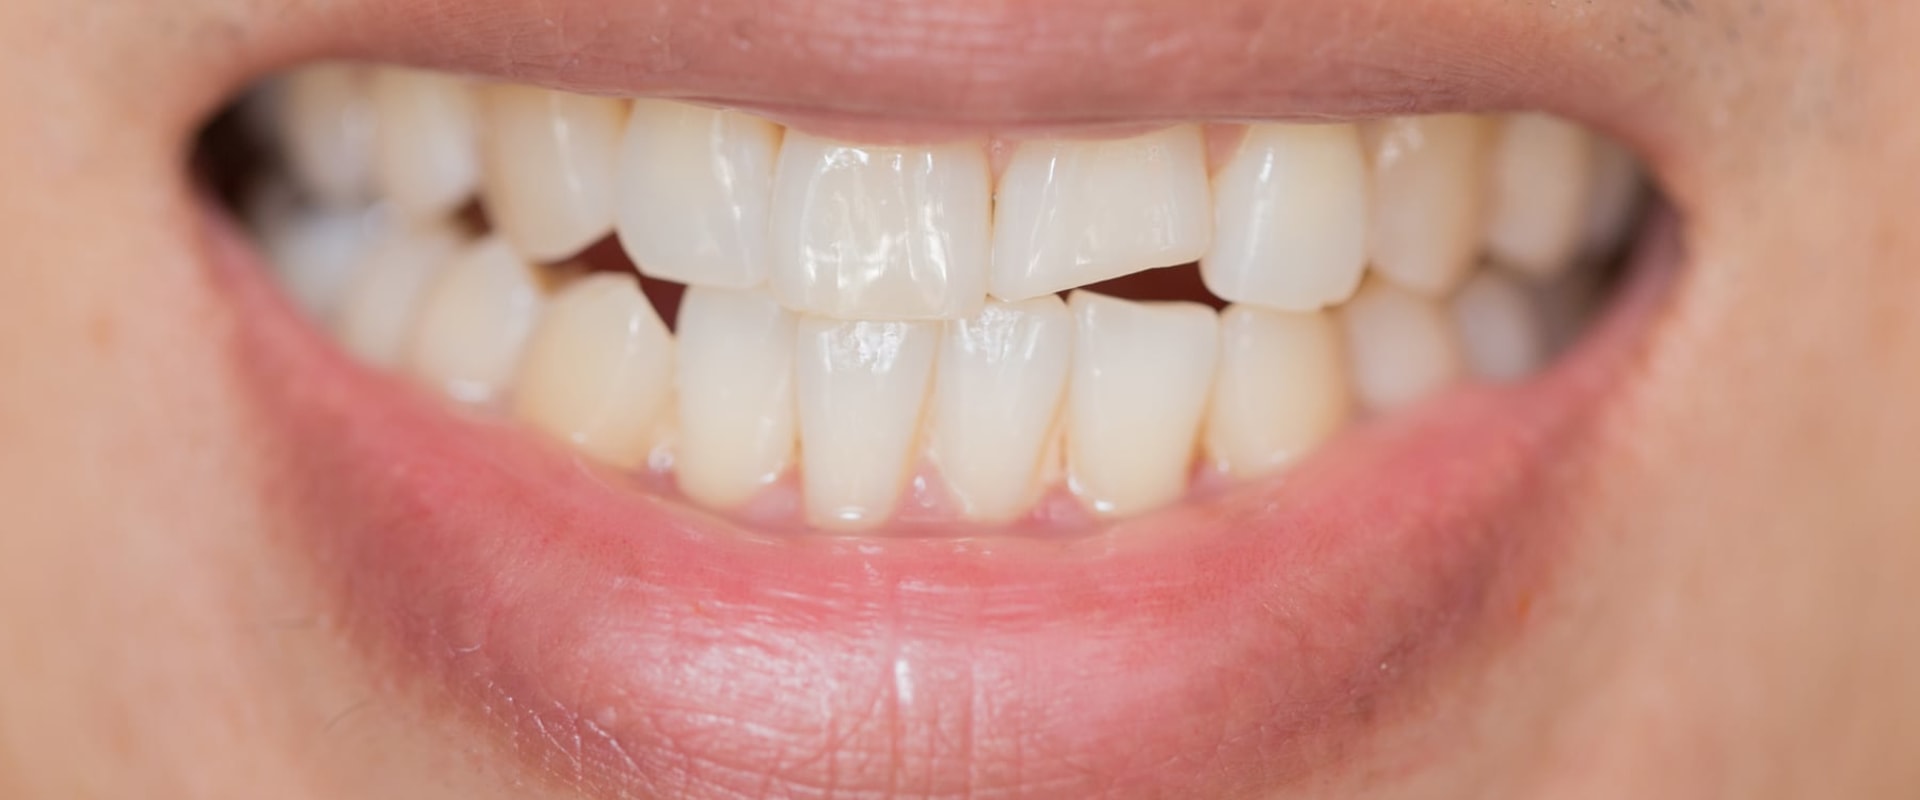 What Are the Consequences of Not Treating a Chipped Tooth?